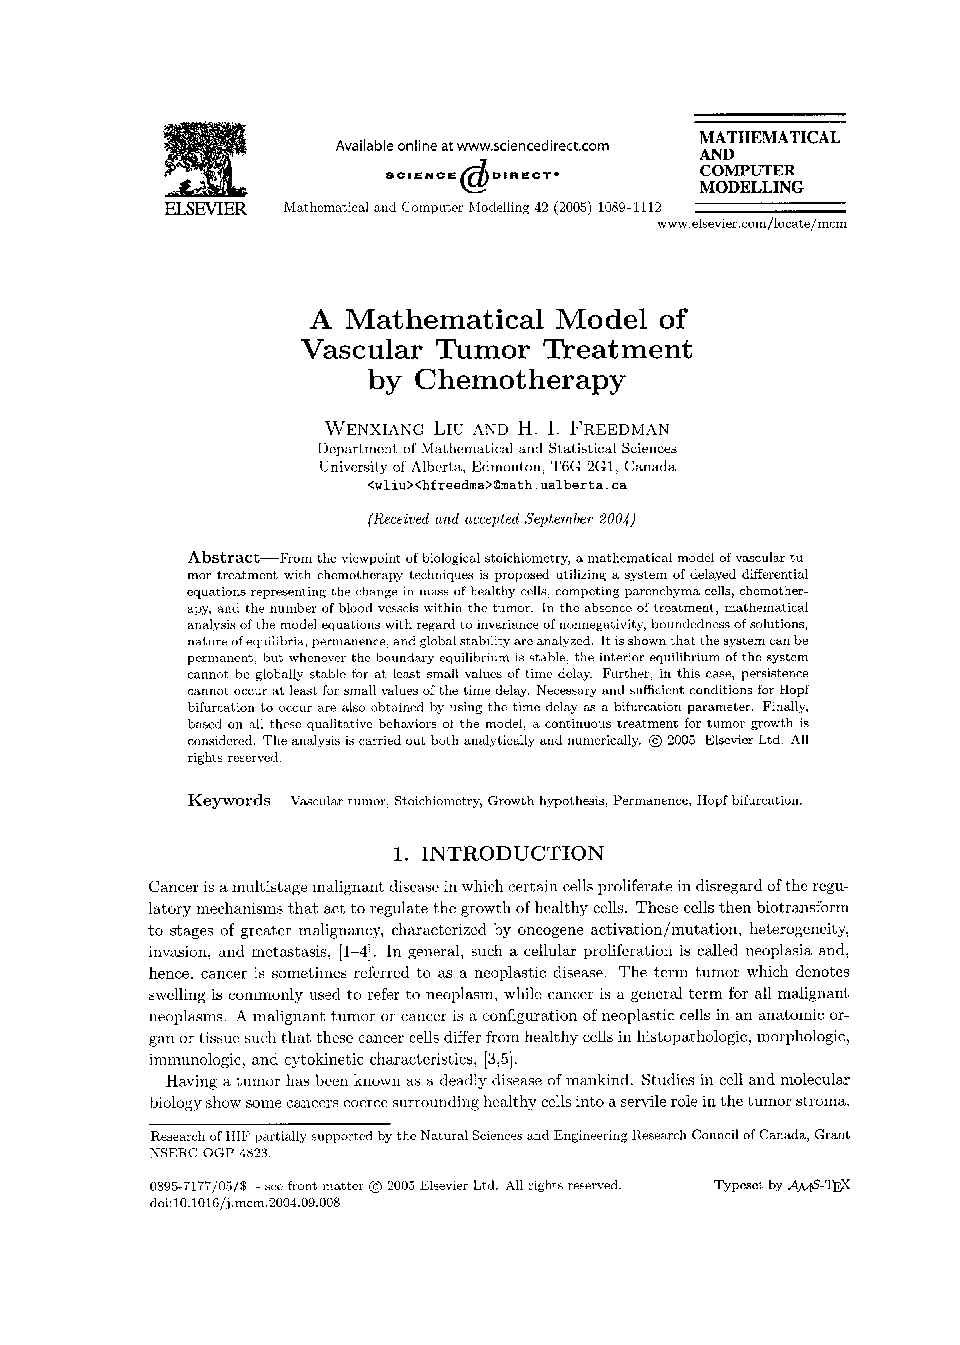 A mathematical model of vascular tumor treatment by chemotherapy